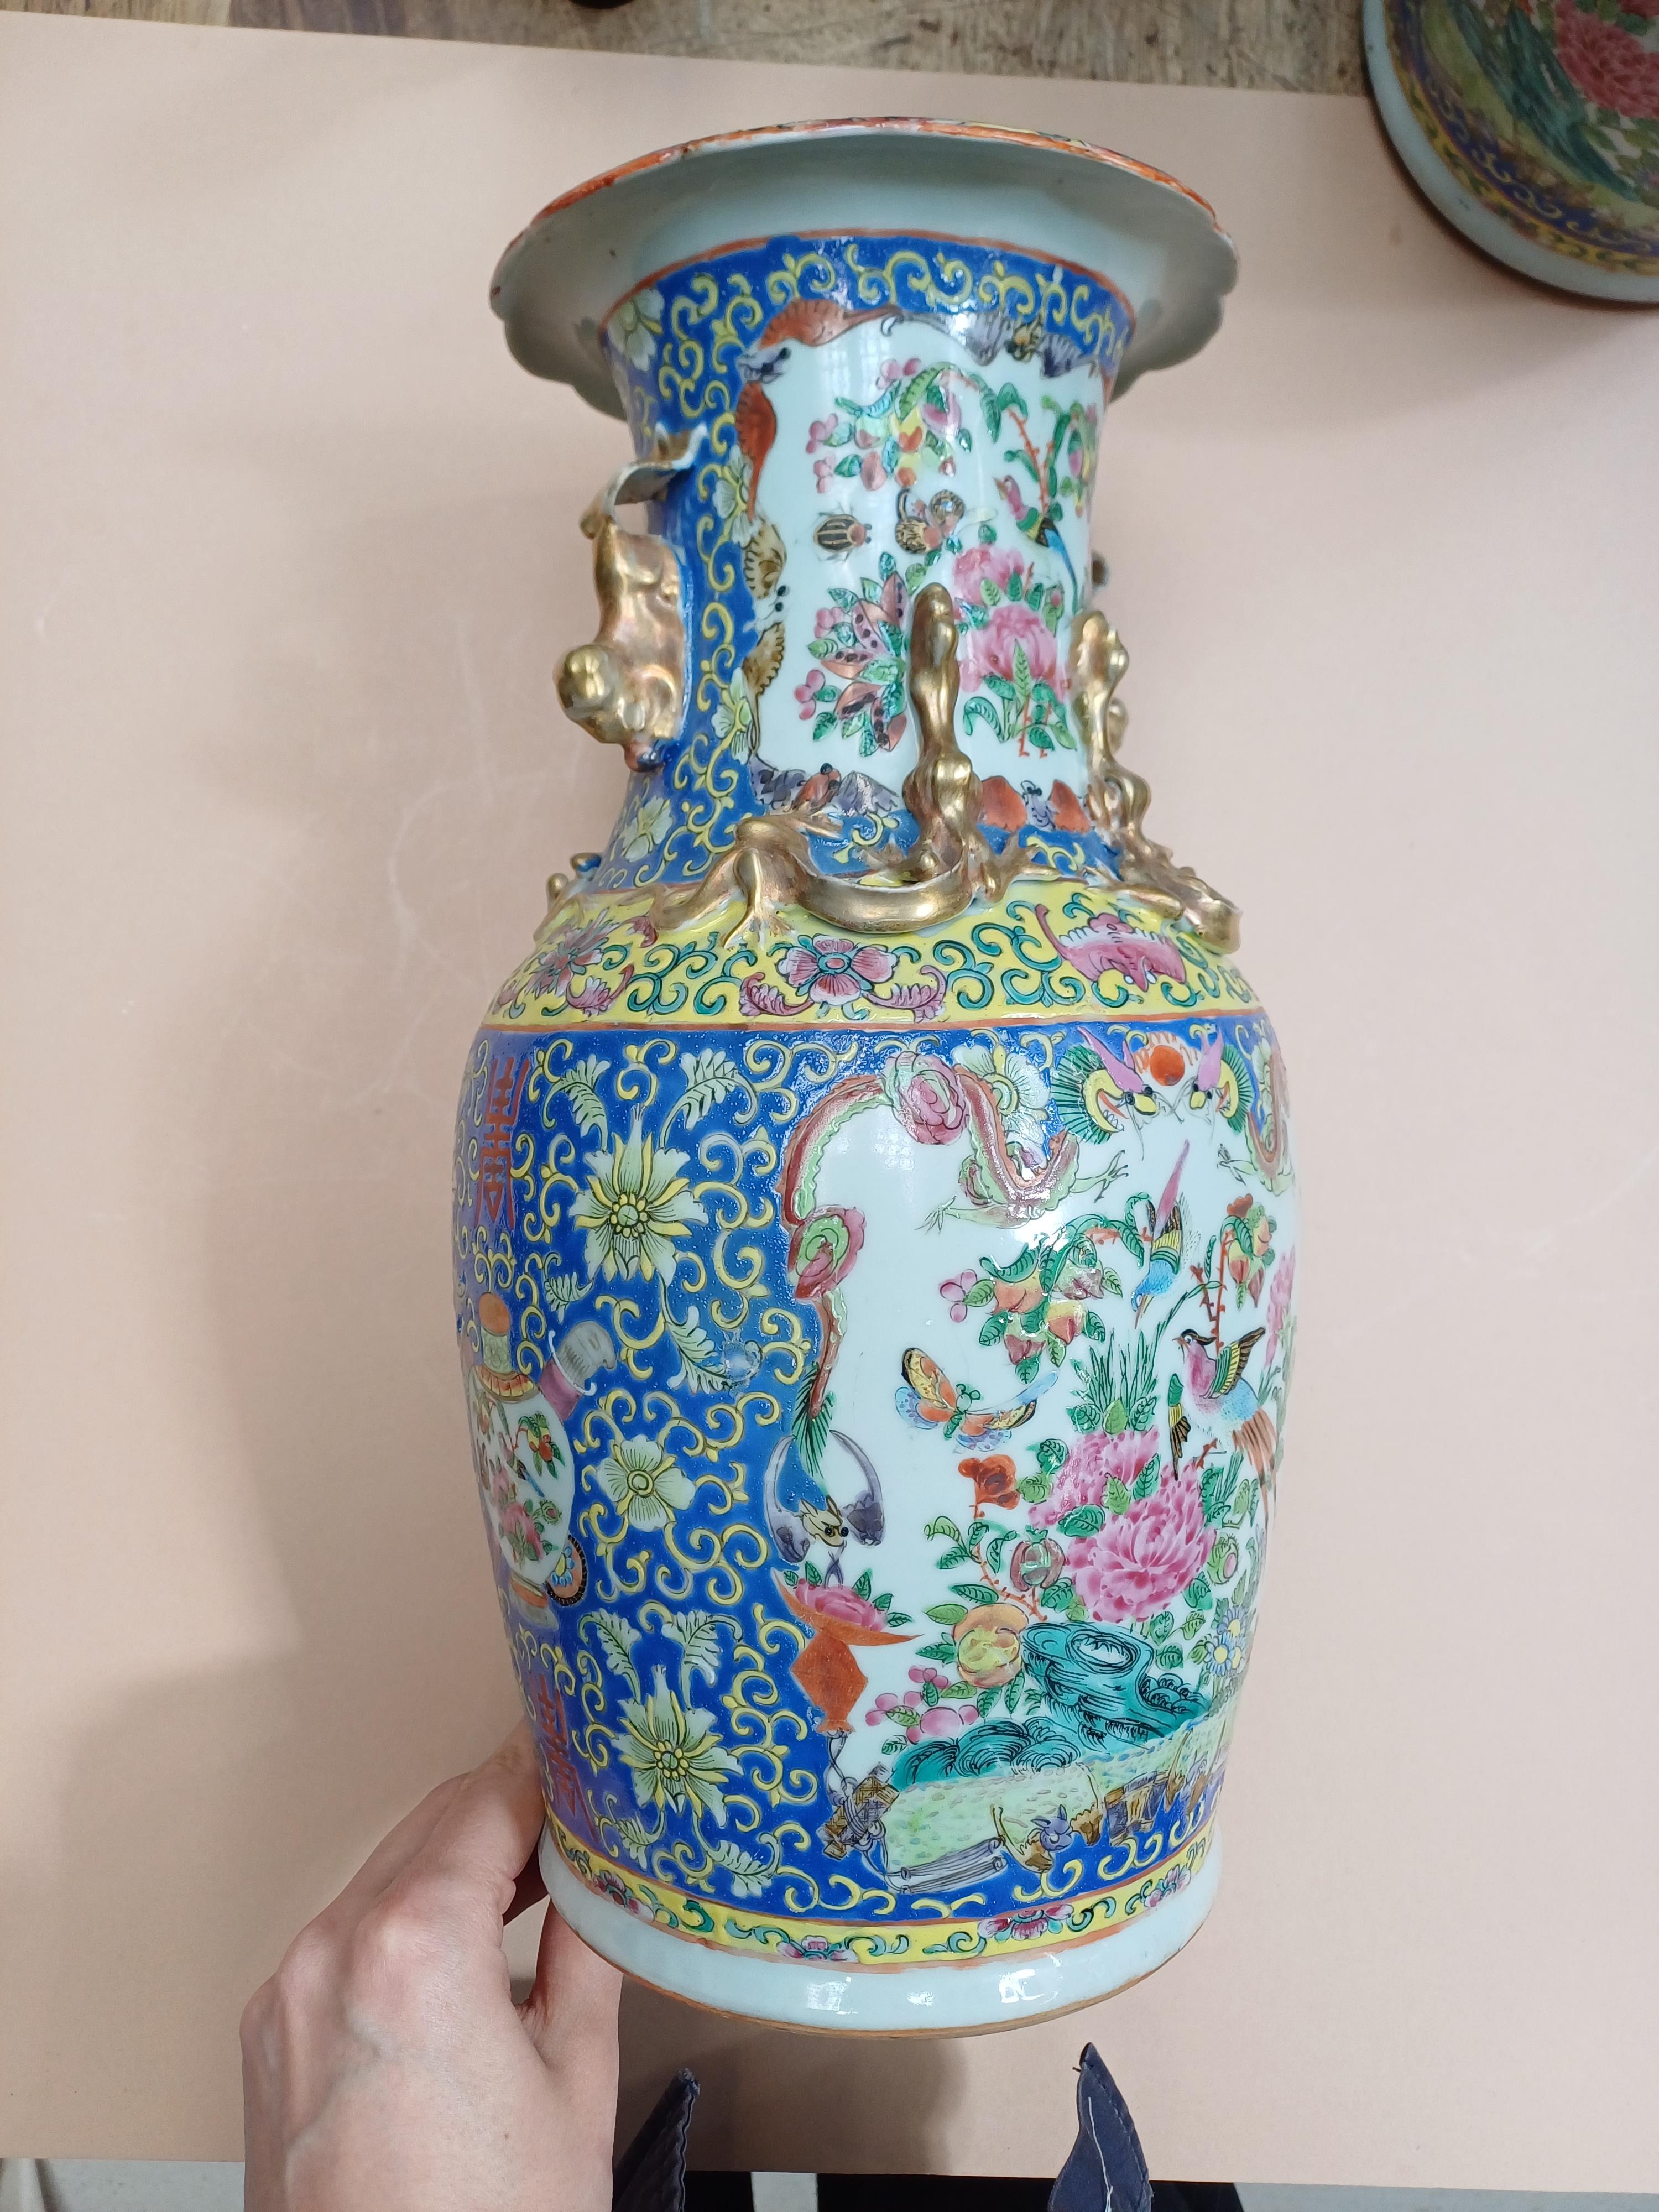 A PAIR OF CHINESE CANTON FAMILLE-ROSE VASES 十九或二十世紀 廣彩花鳥圖紋瓶一對 - Image 11 of 14